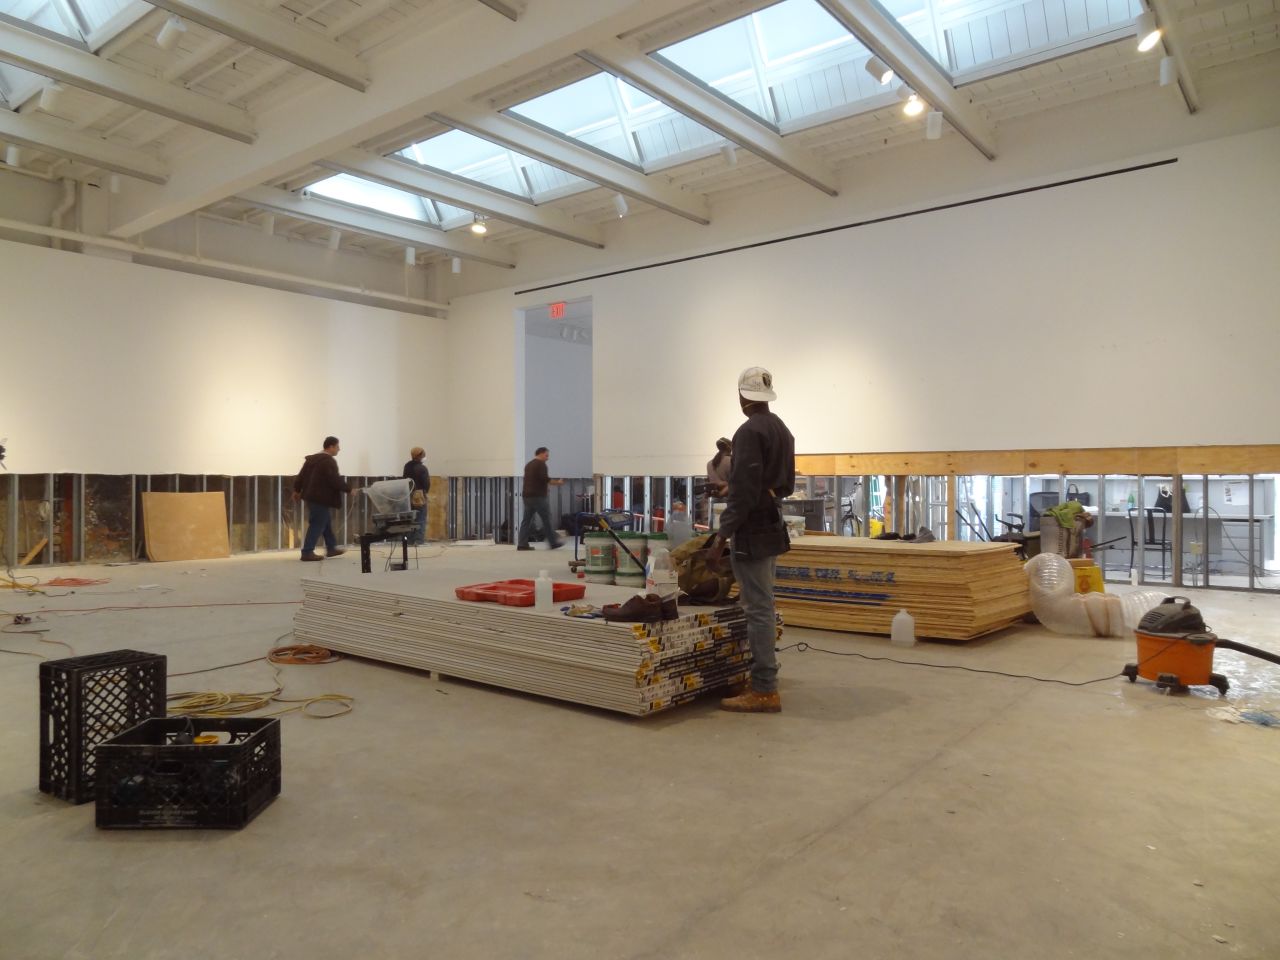 Ongoing construction inside Haunch of Venison, a large gallery in Manhattan's Chelsea neighborhood.